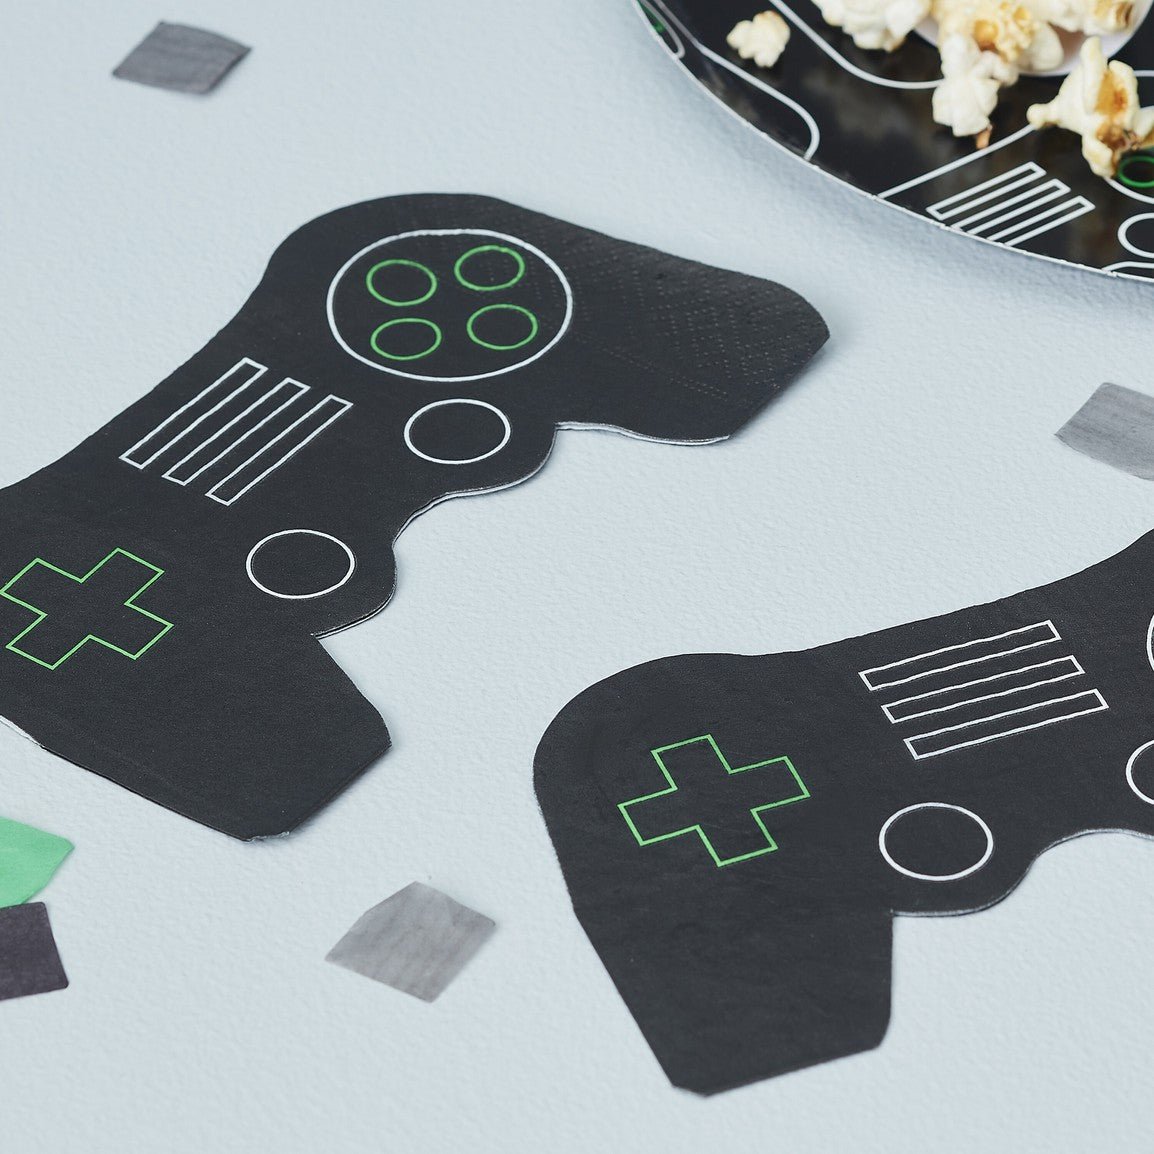 NAPKINS - LEVEL UP GAMING CONTROLLER